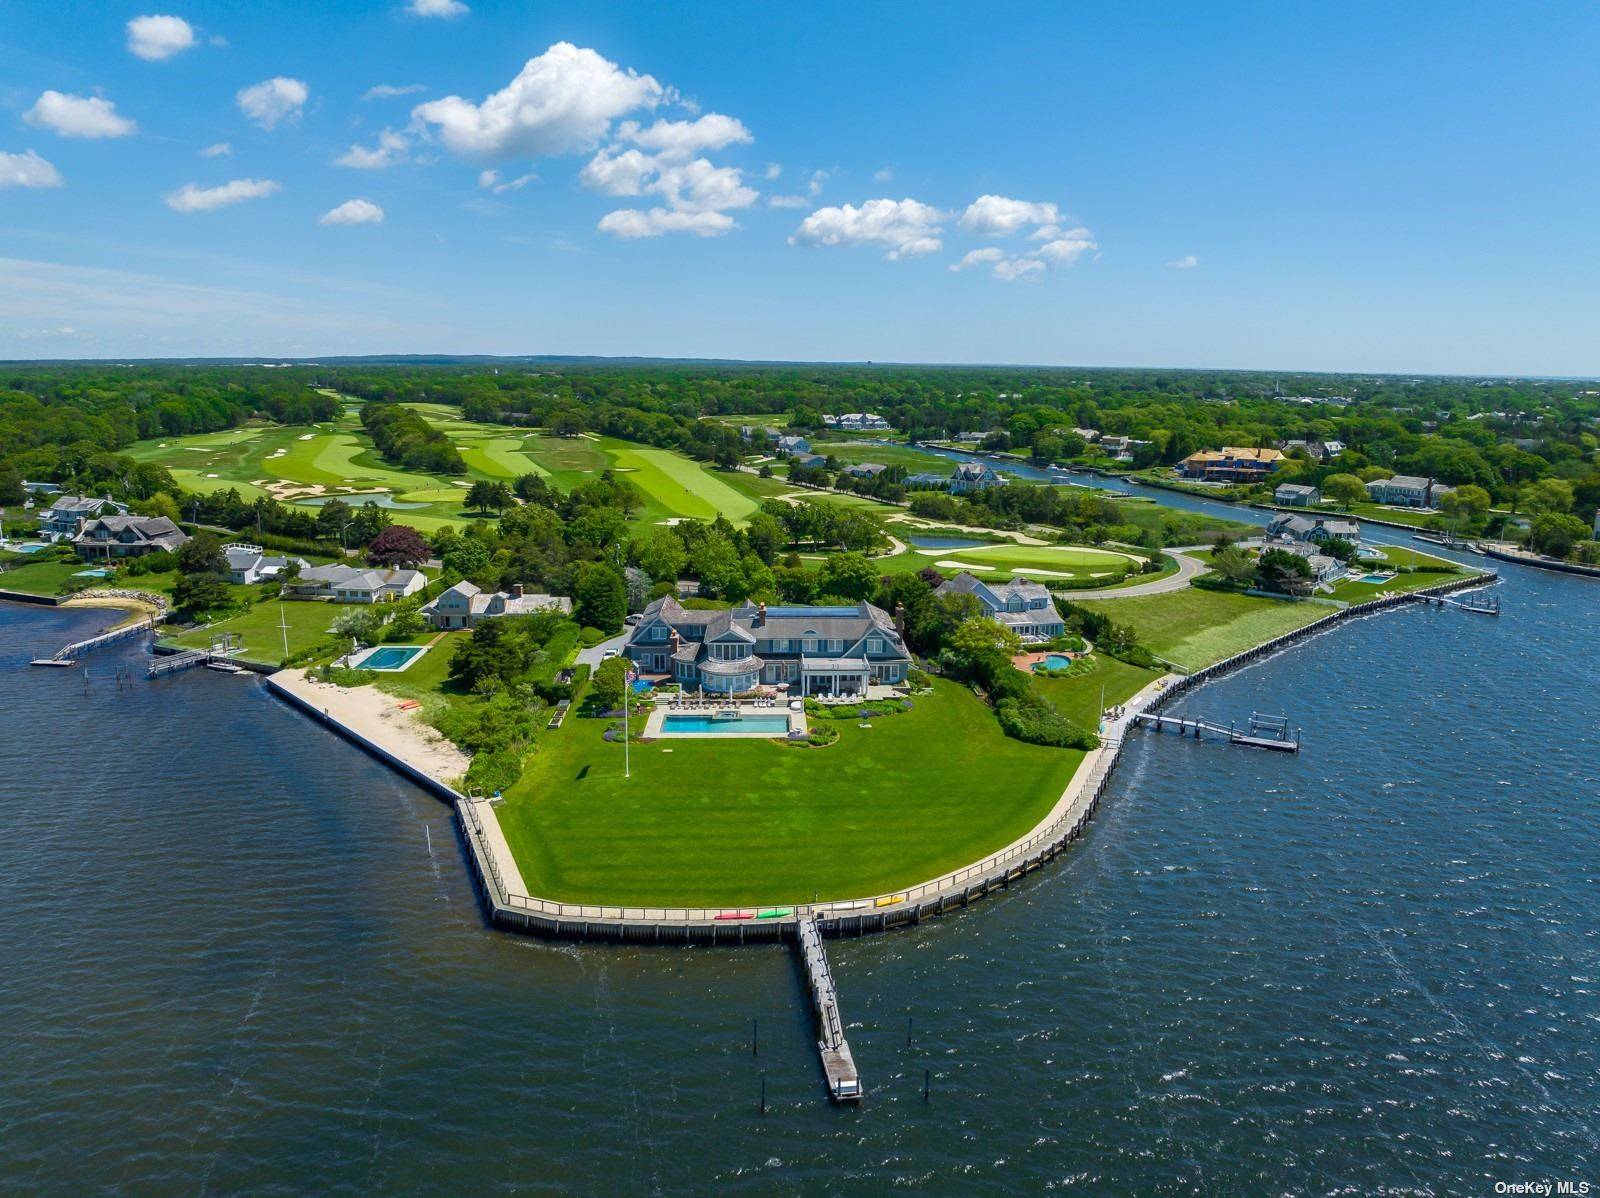 Introducing The Point, an exquisite waterfront estate situated on 2 acres with 380 feet of frontage on Moriches Bay, a private dock and separate carriage house.